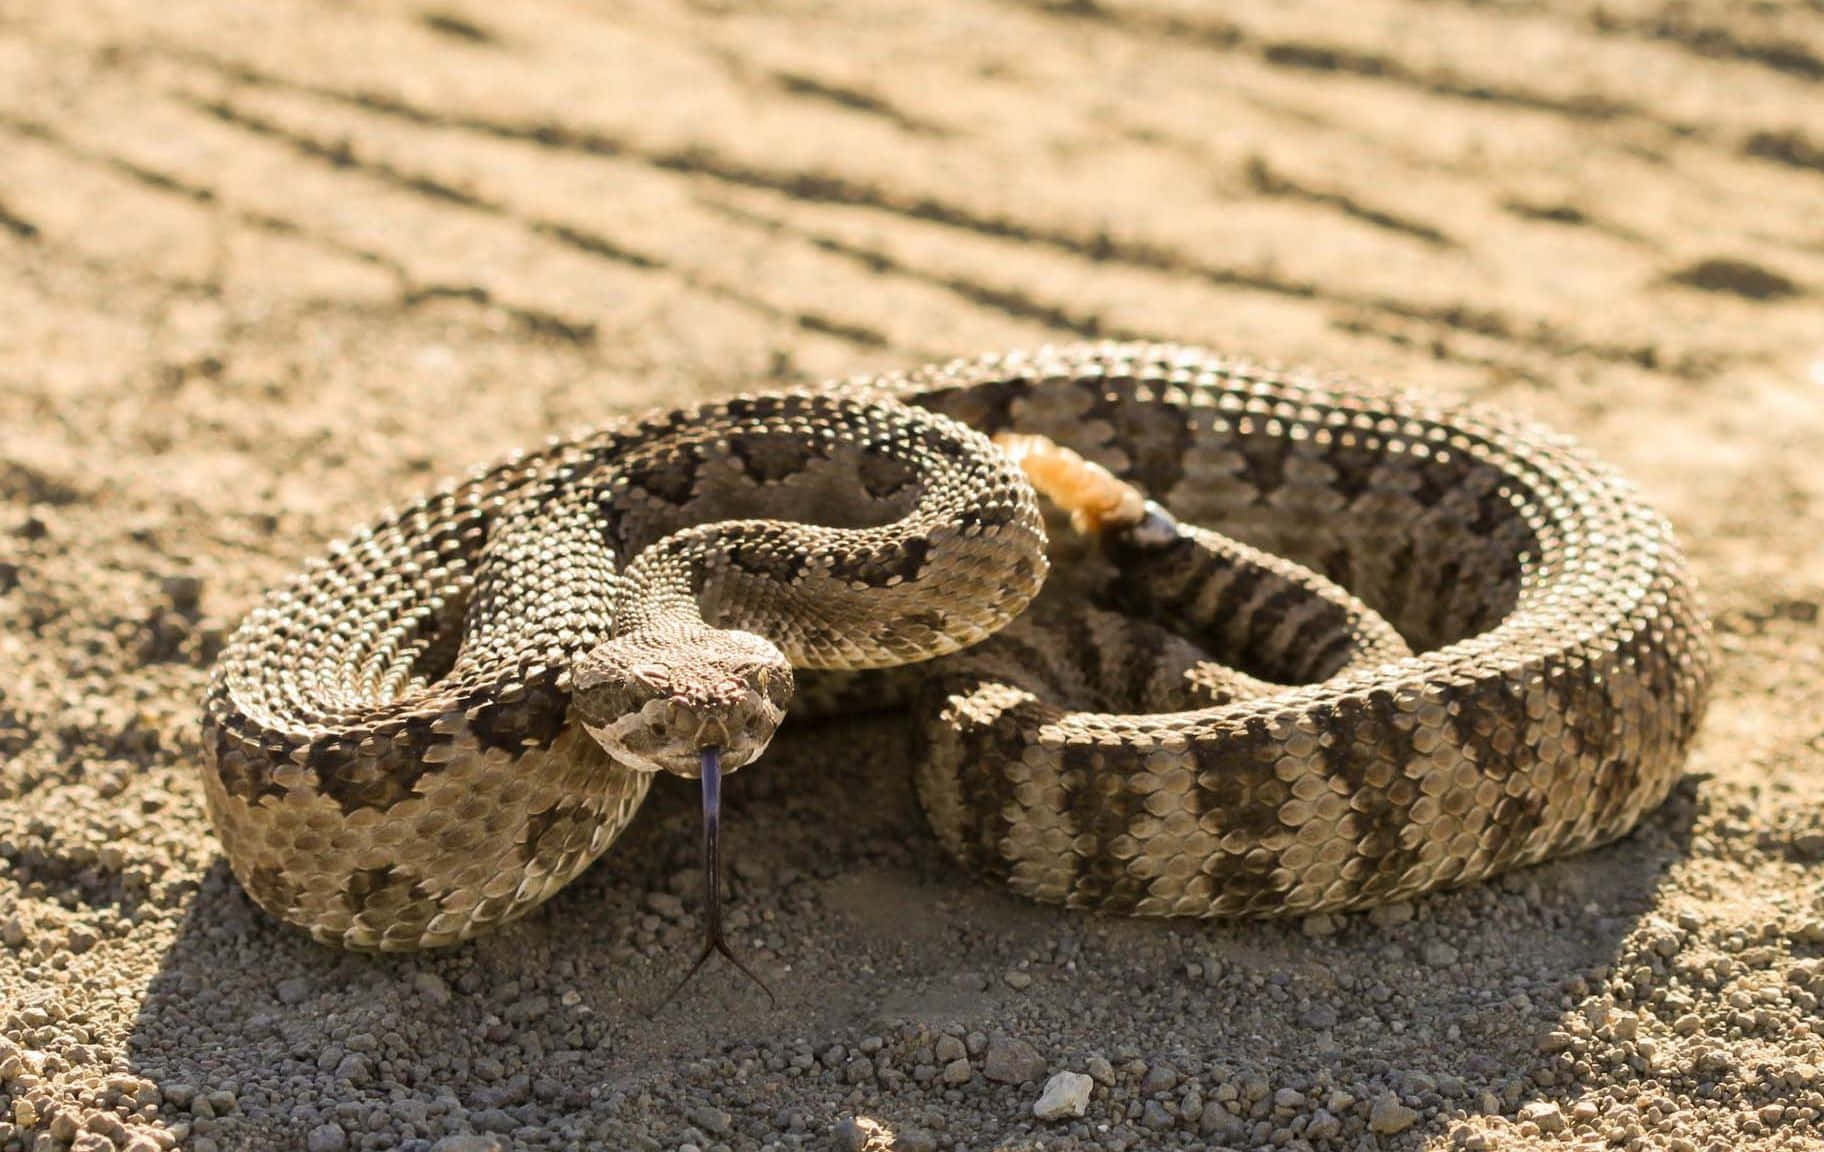 A Rattle Snake Is Laying On The Ground